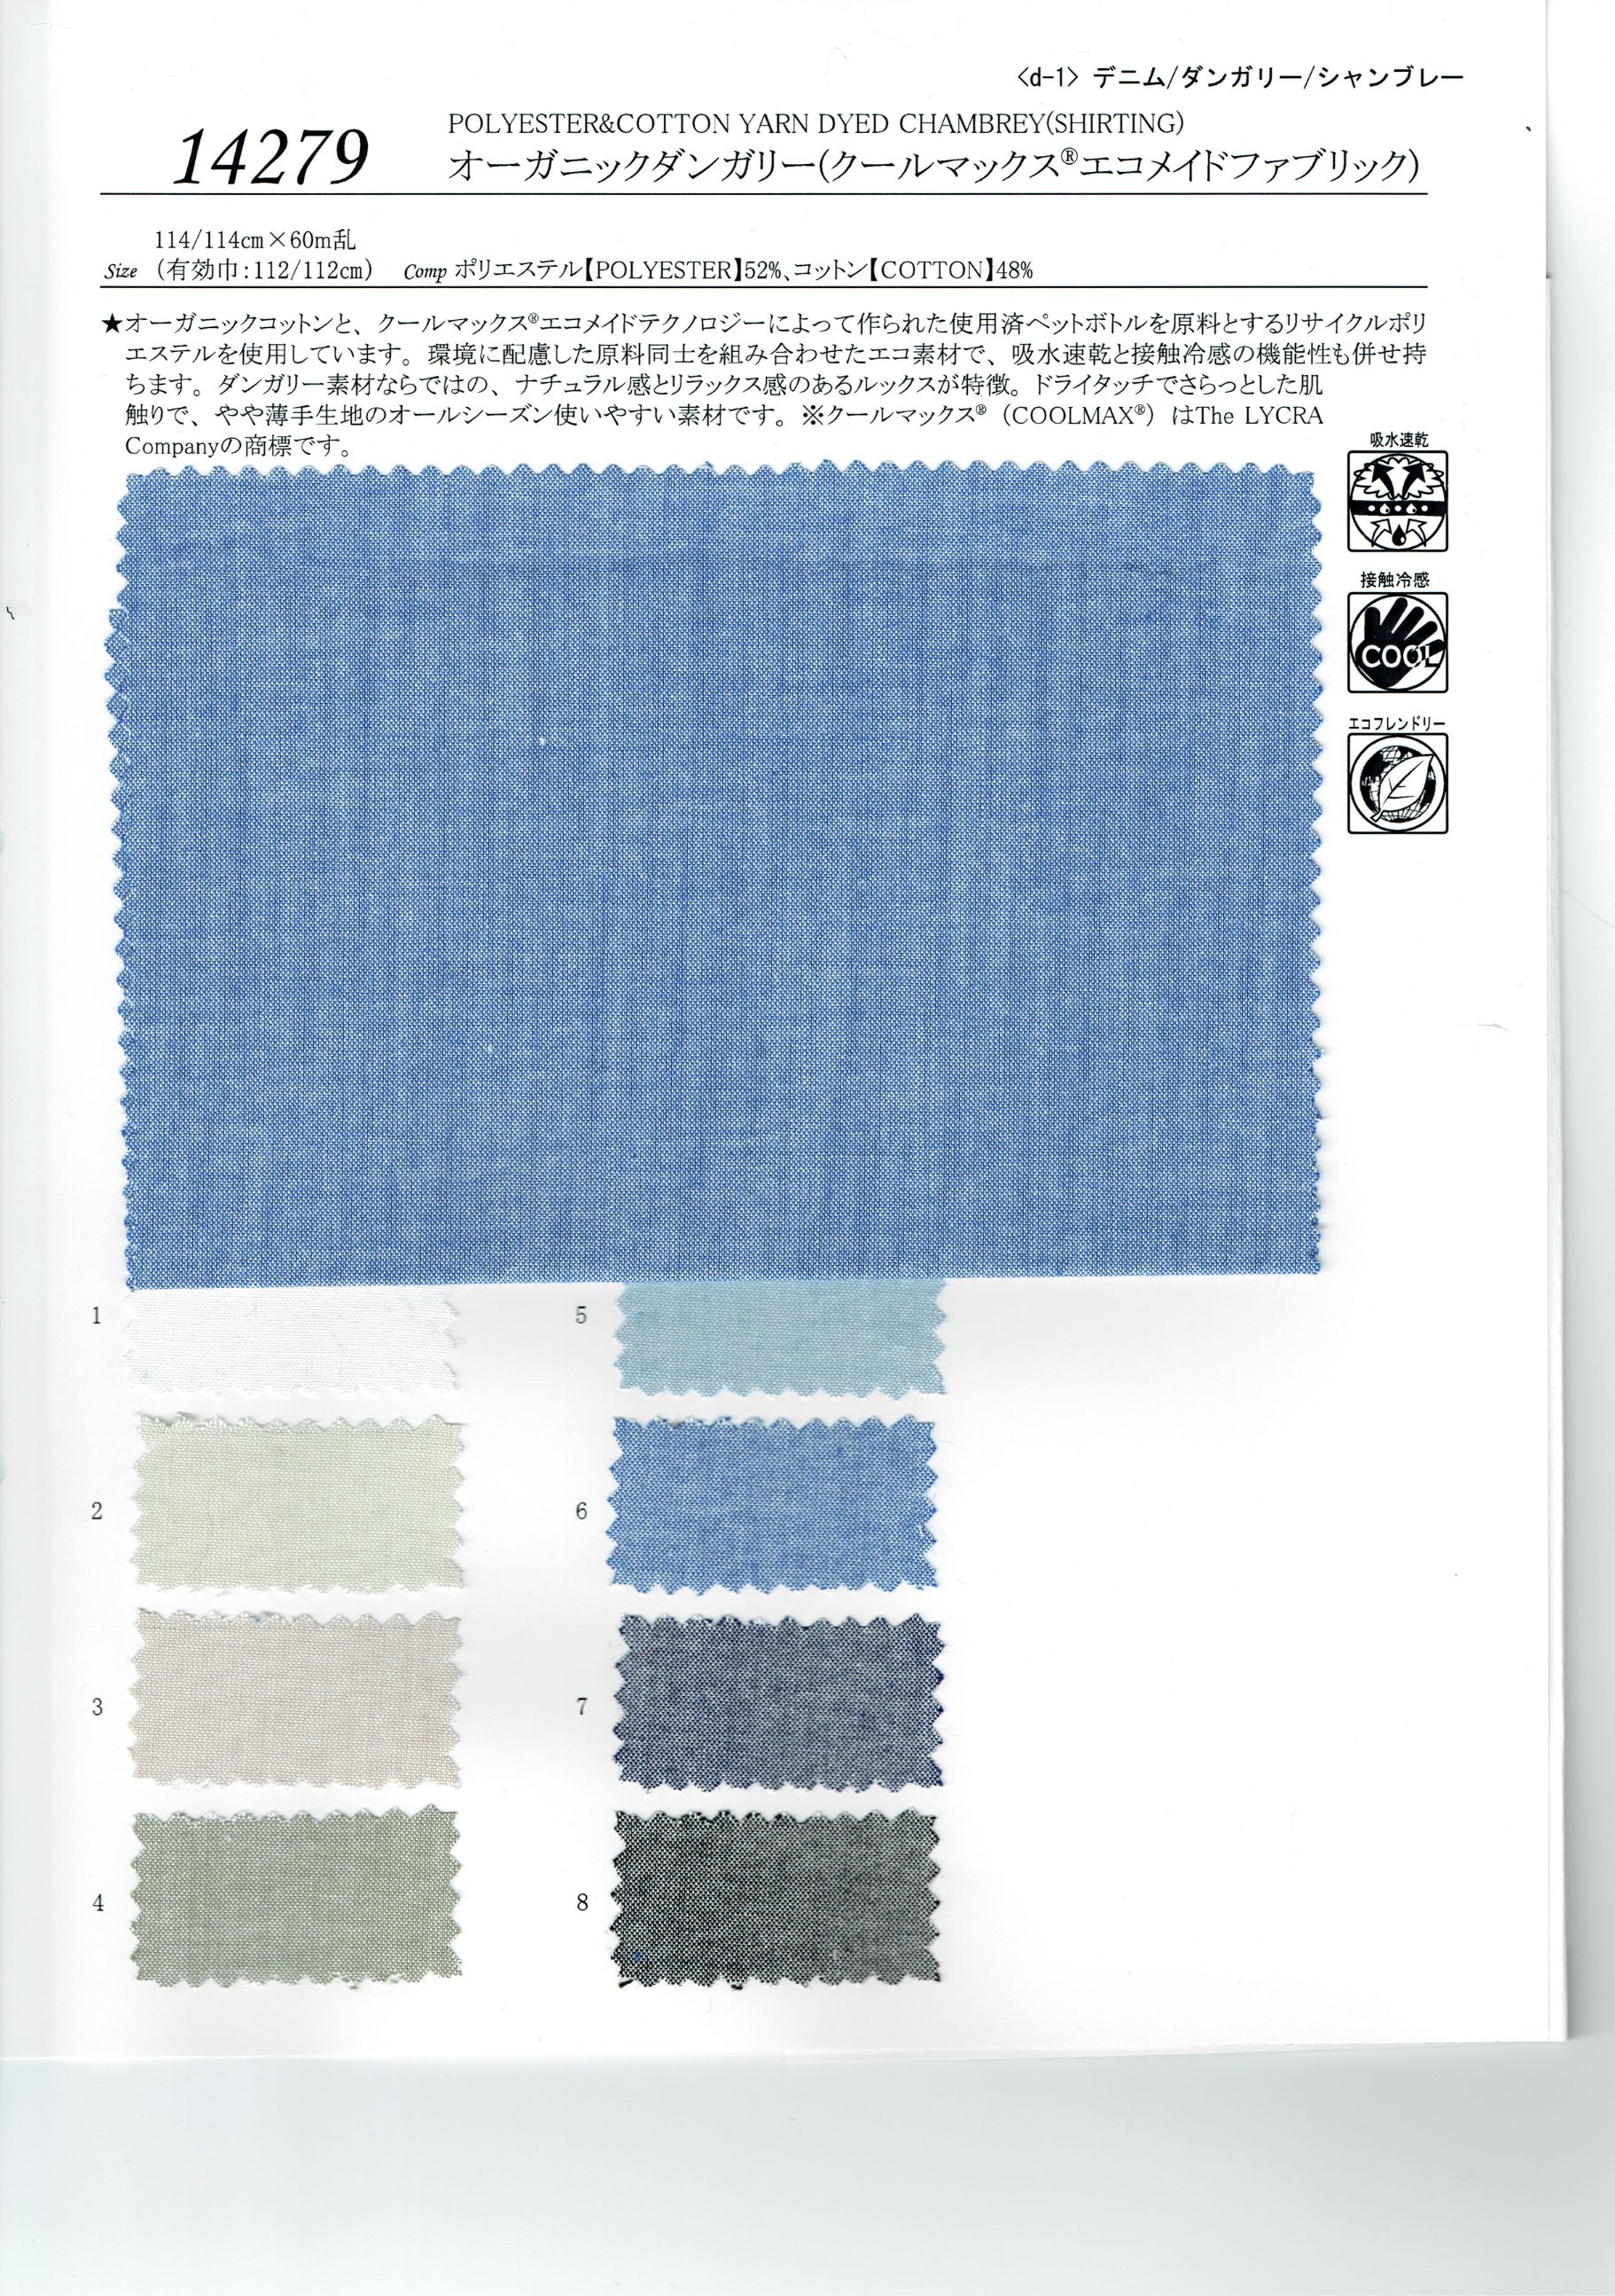 View POLYESTER52/COTTON48/[RECYCLED36%]/[ORGANIC48%] YARN DYED CHAMBREY[SHIRTING] YARN DYED CHAMBREY[SHIRTING]